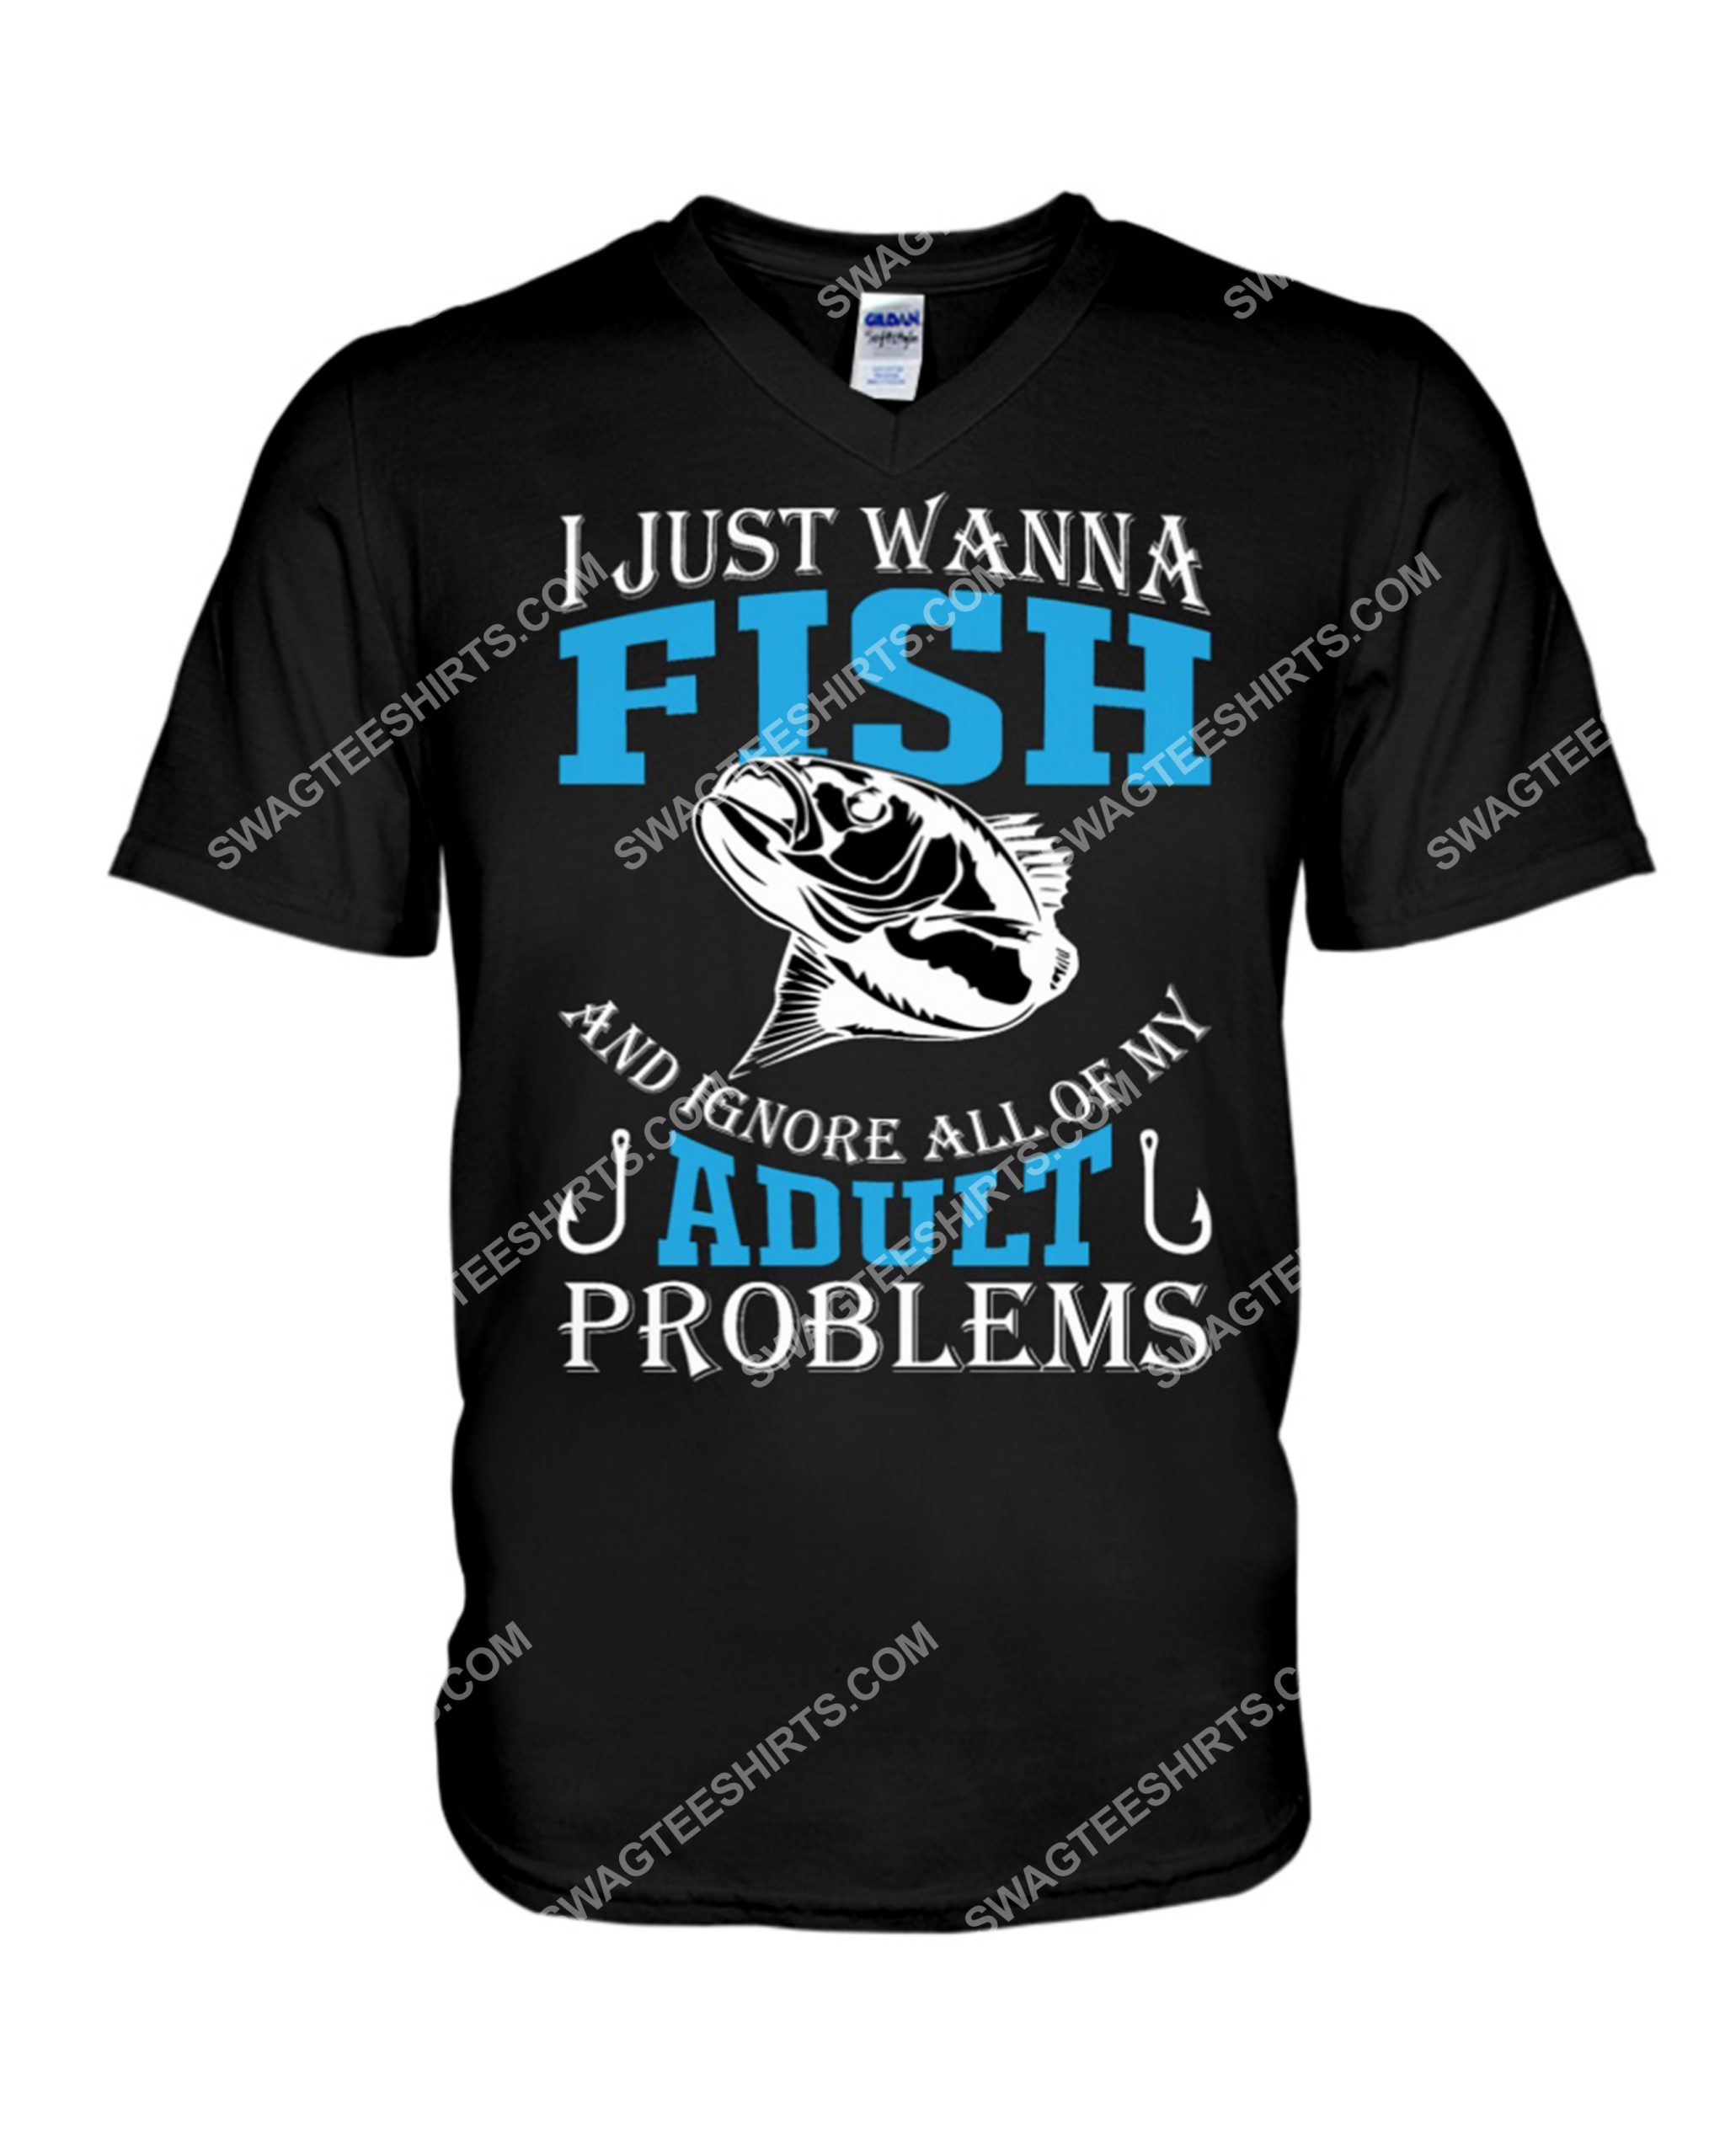 i just wanna fish and ignore all of my adult problems shirt 1(1)